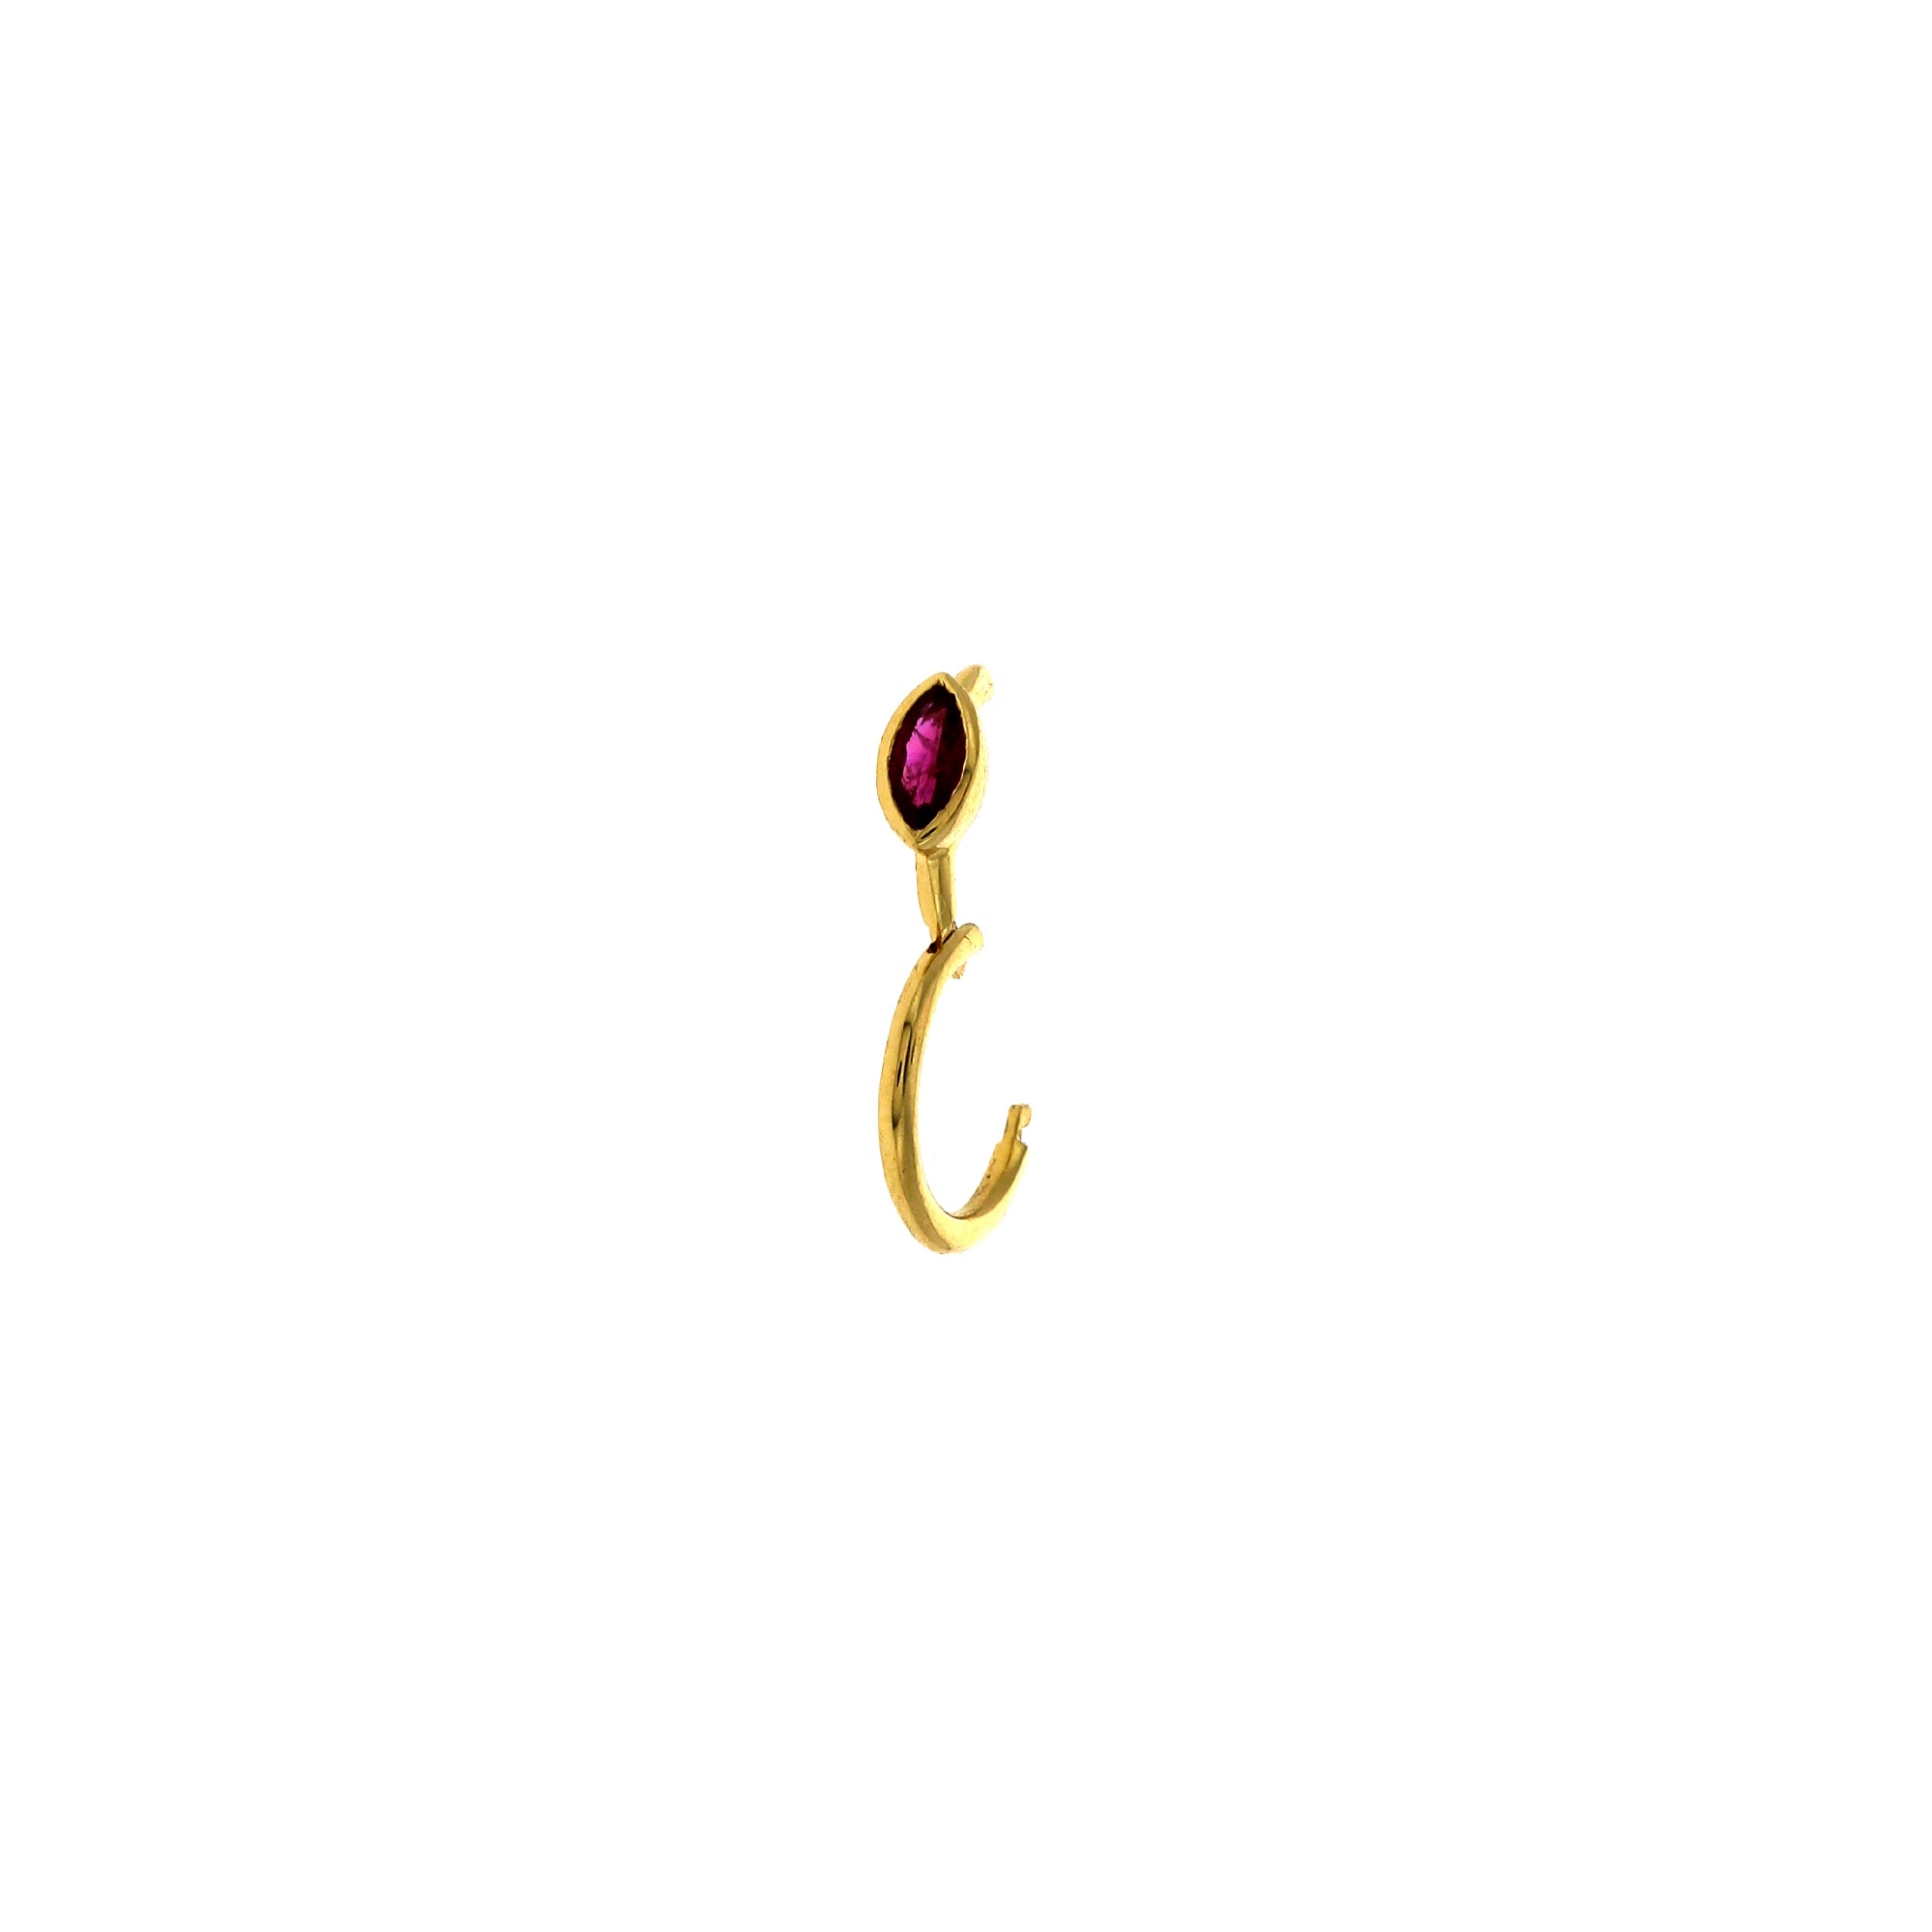 6.5mm Ruby Marquise 3x2mm Yellow Gold Hoop